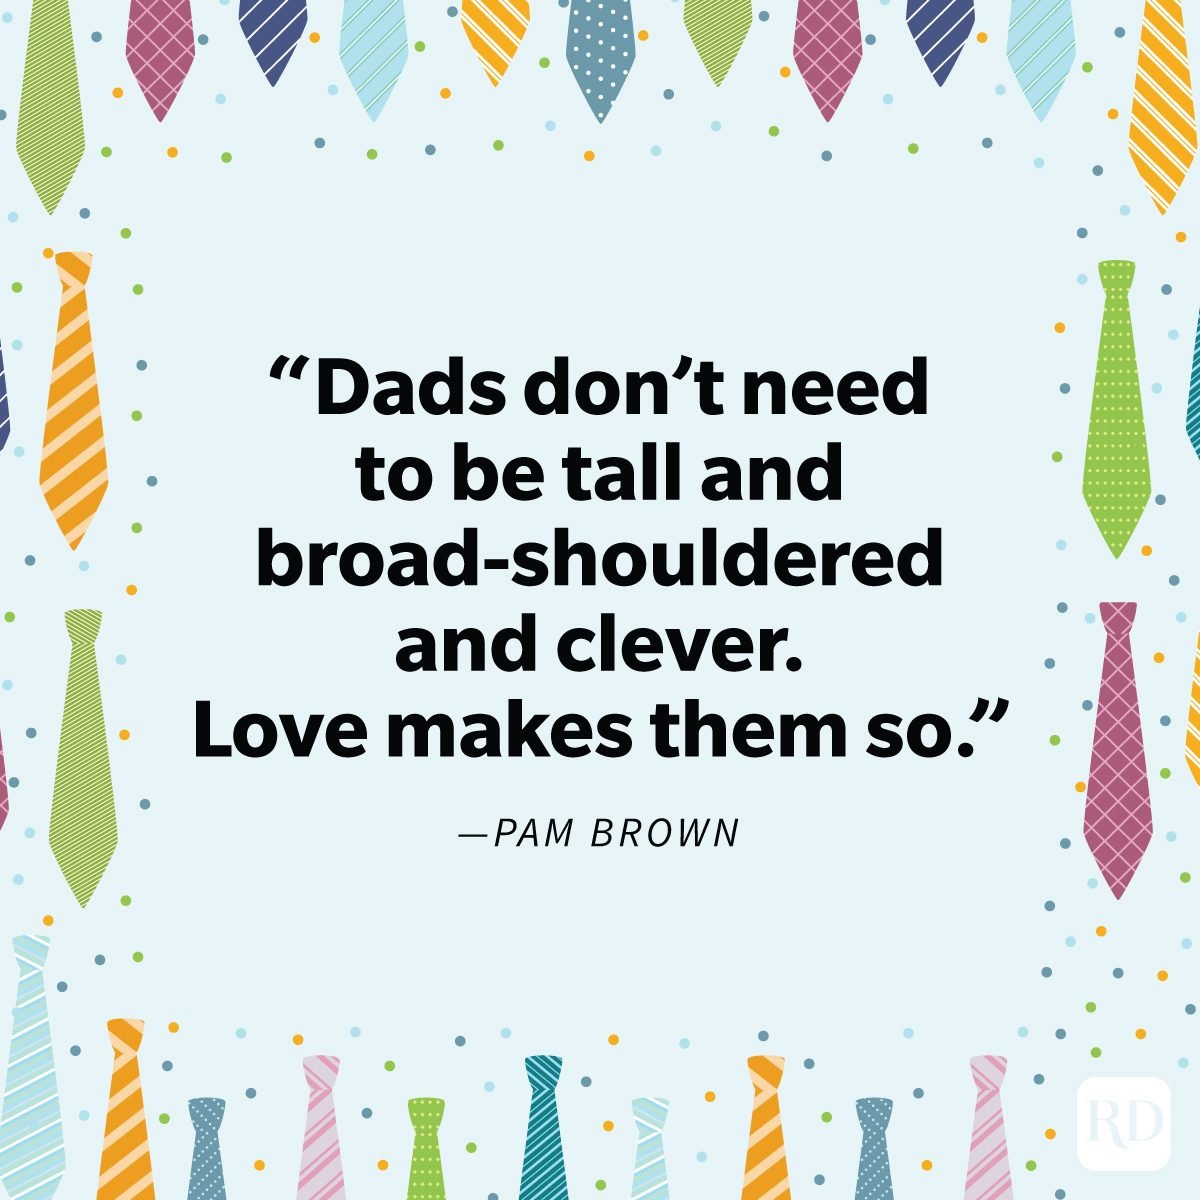 Heartfelt Father's Day Quotes That Celebrate The No 1 Guy In Your Life with ties in different patterns framing it